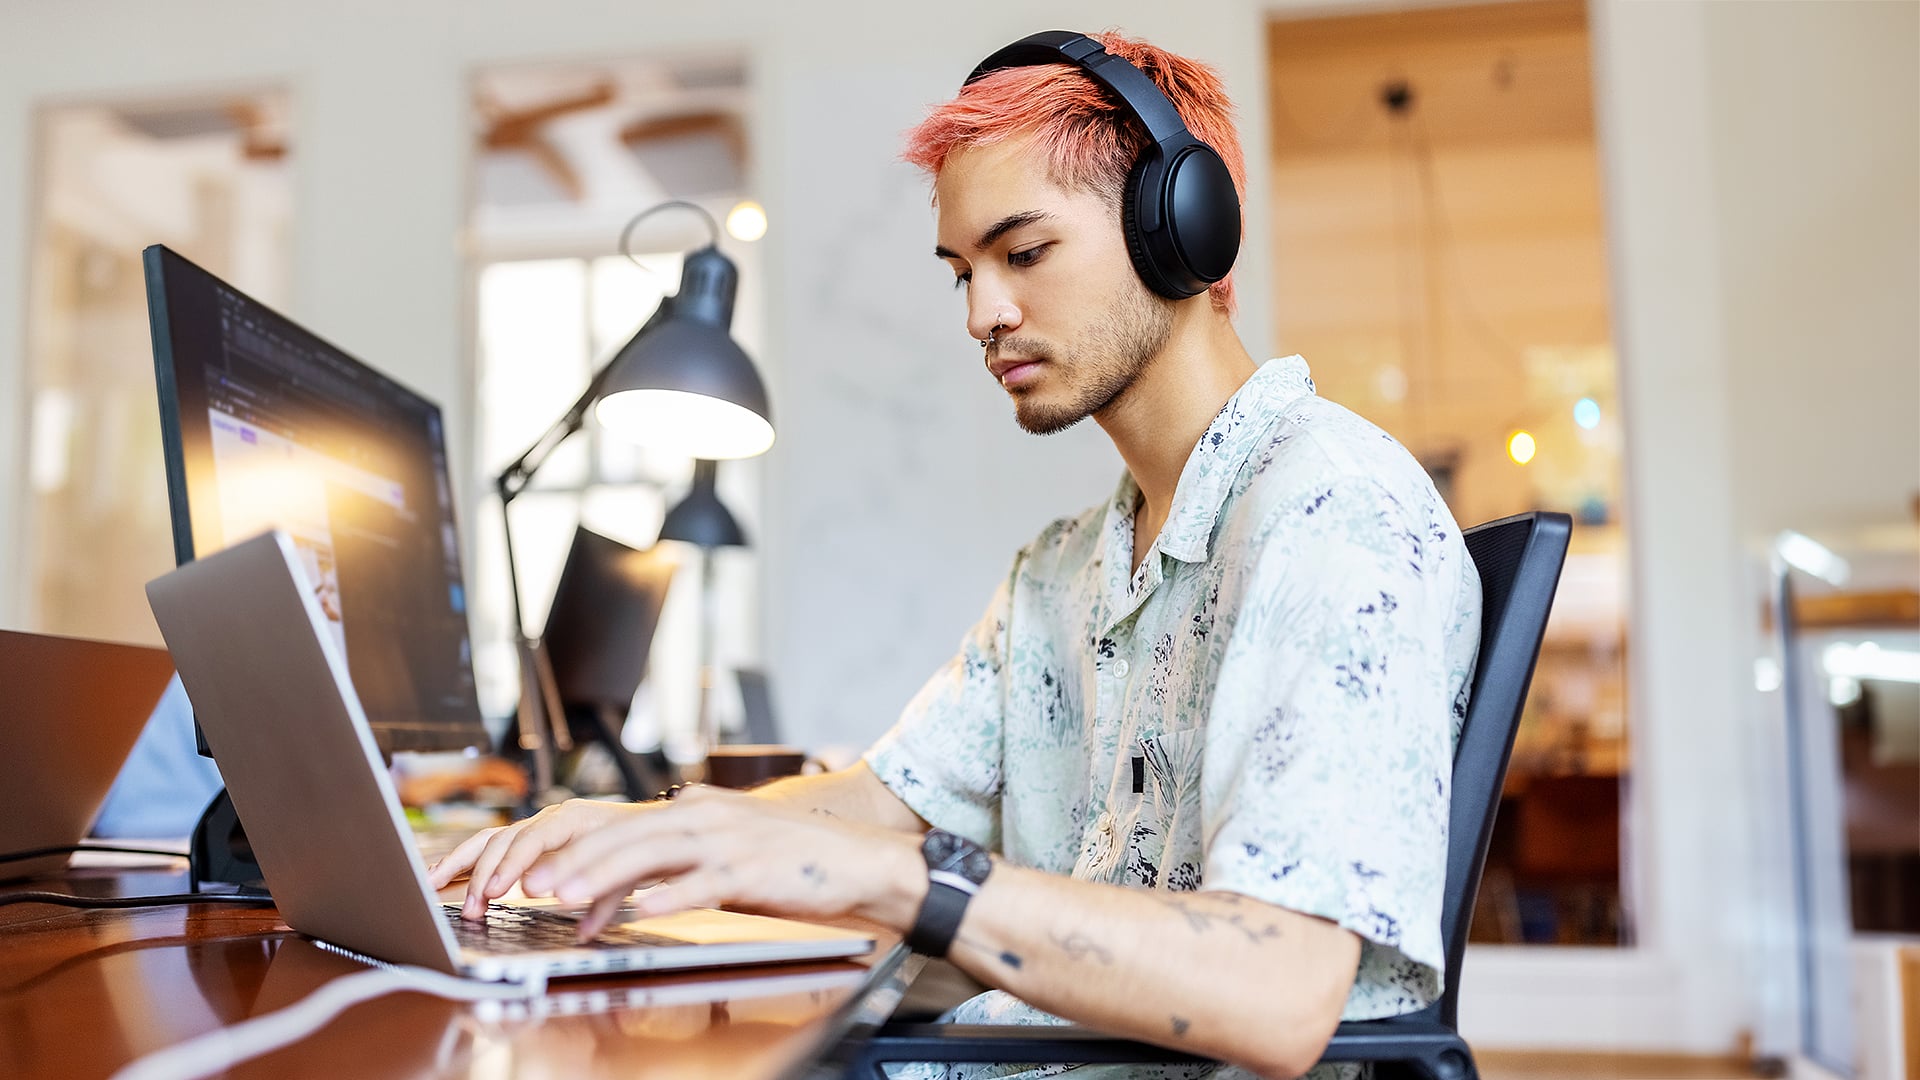 Person with pink hair and headphones working on computer in office environment.